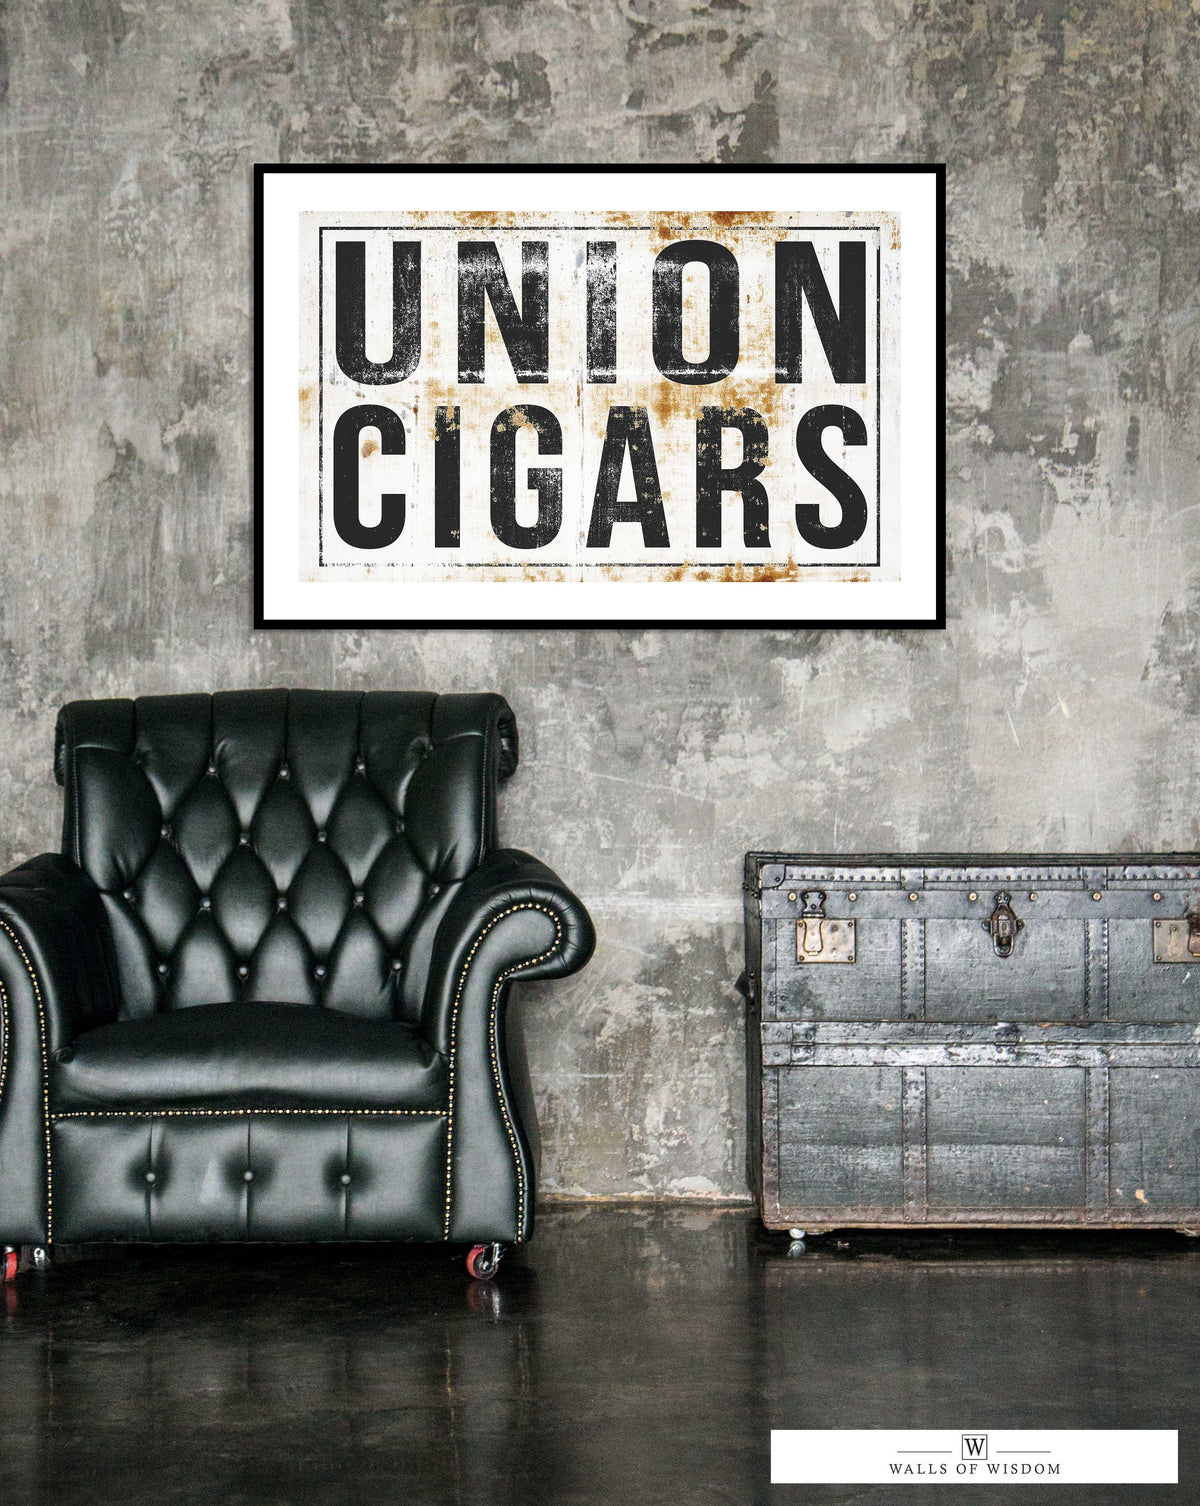 Cigar Bar & Lounge Sign for a Speakeasy Decor or Smoking Room Poster Print